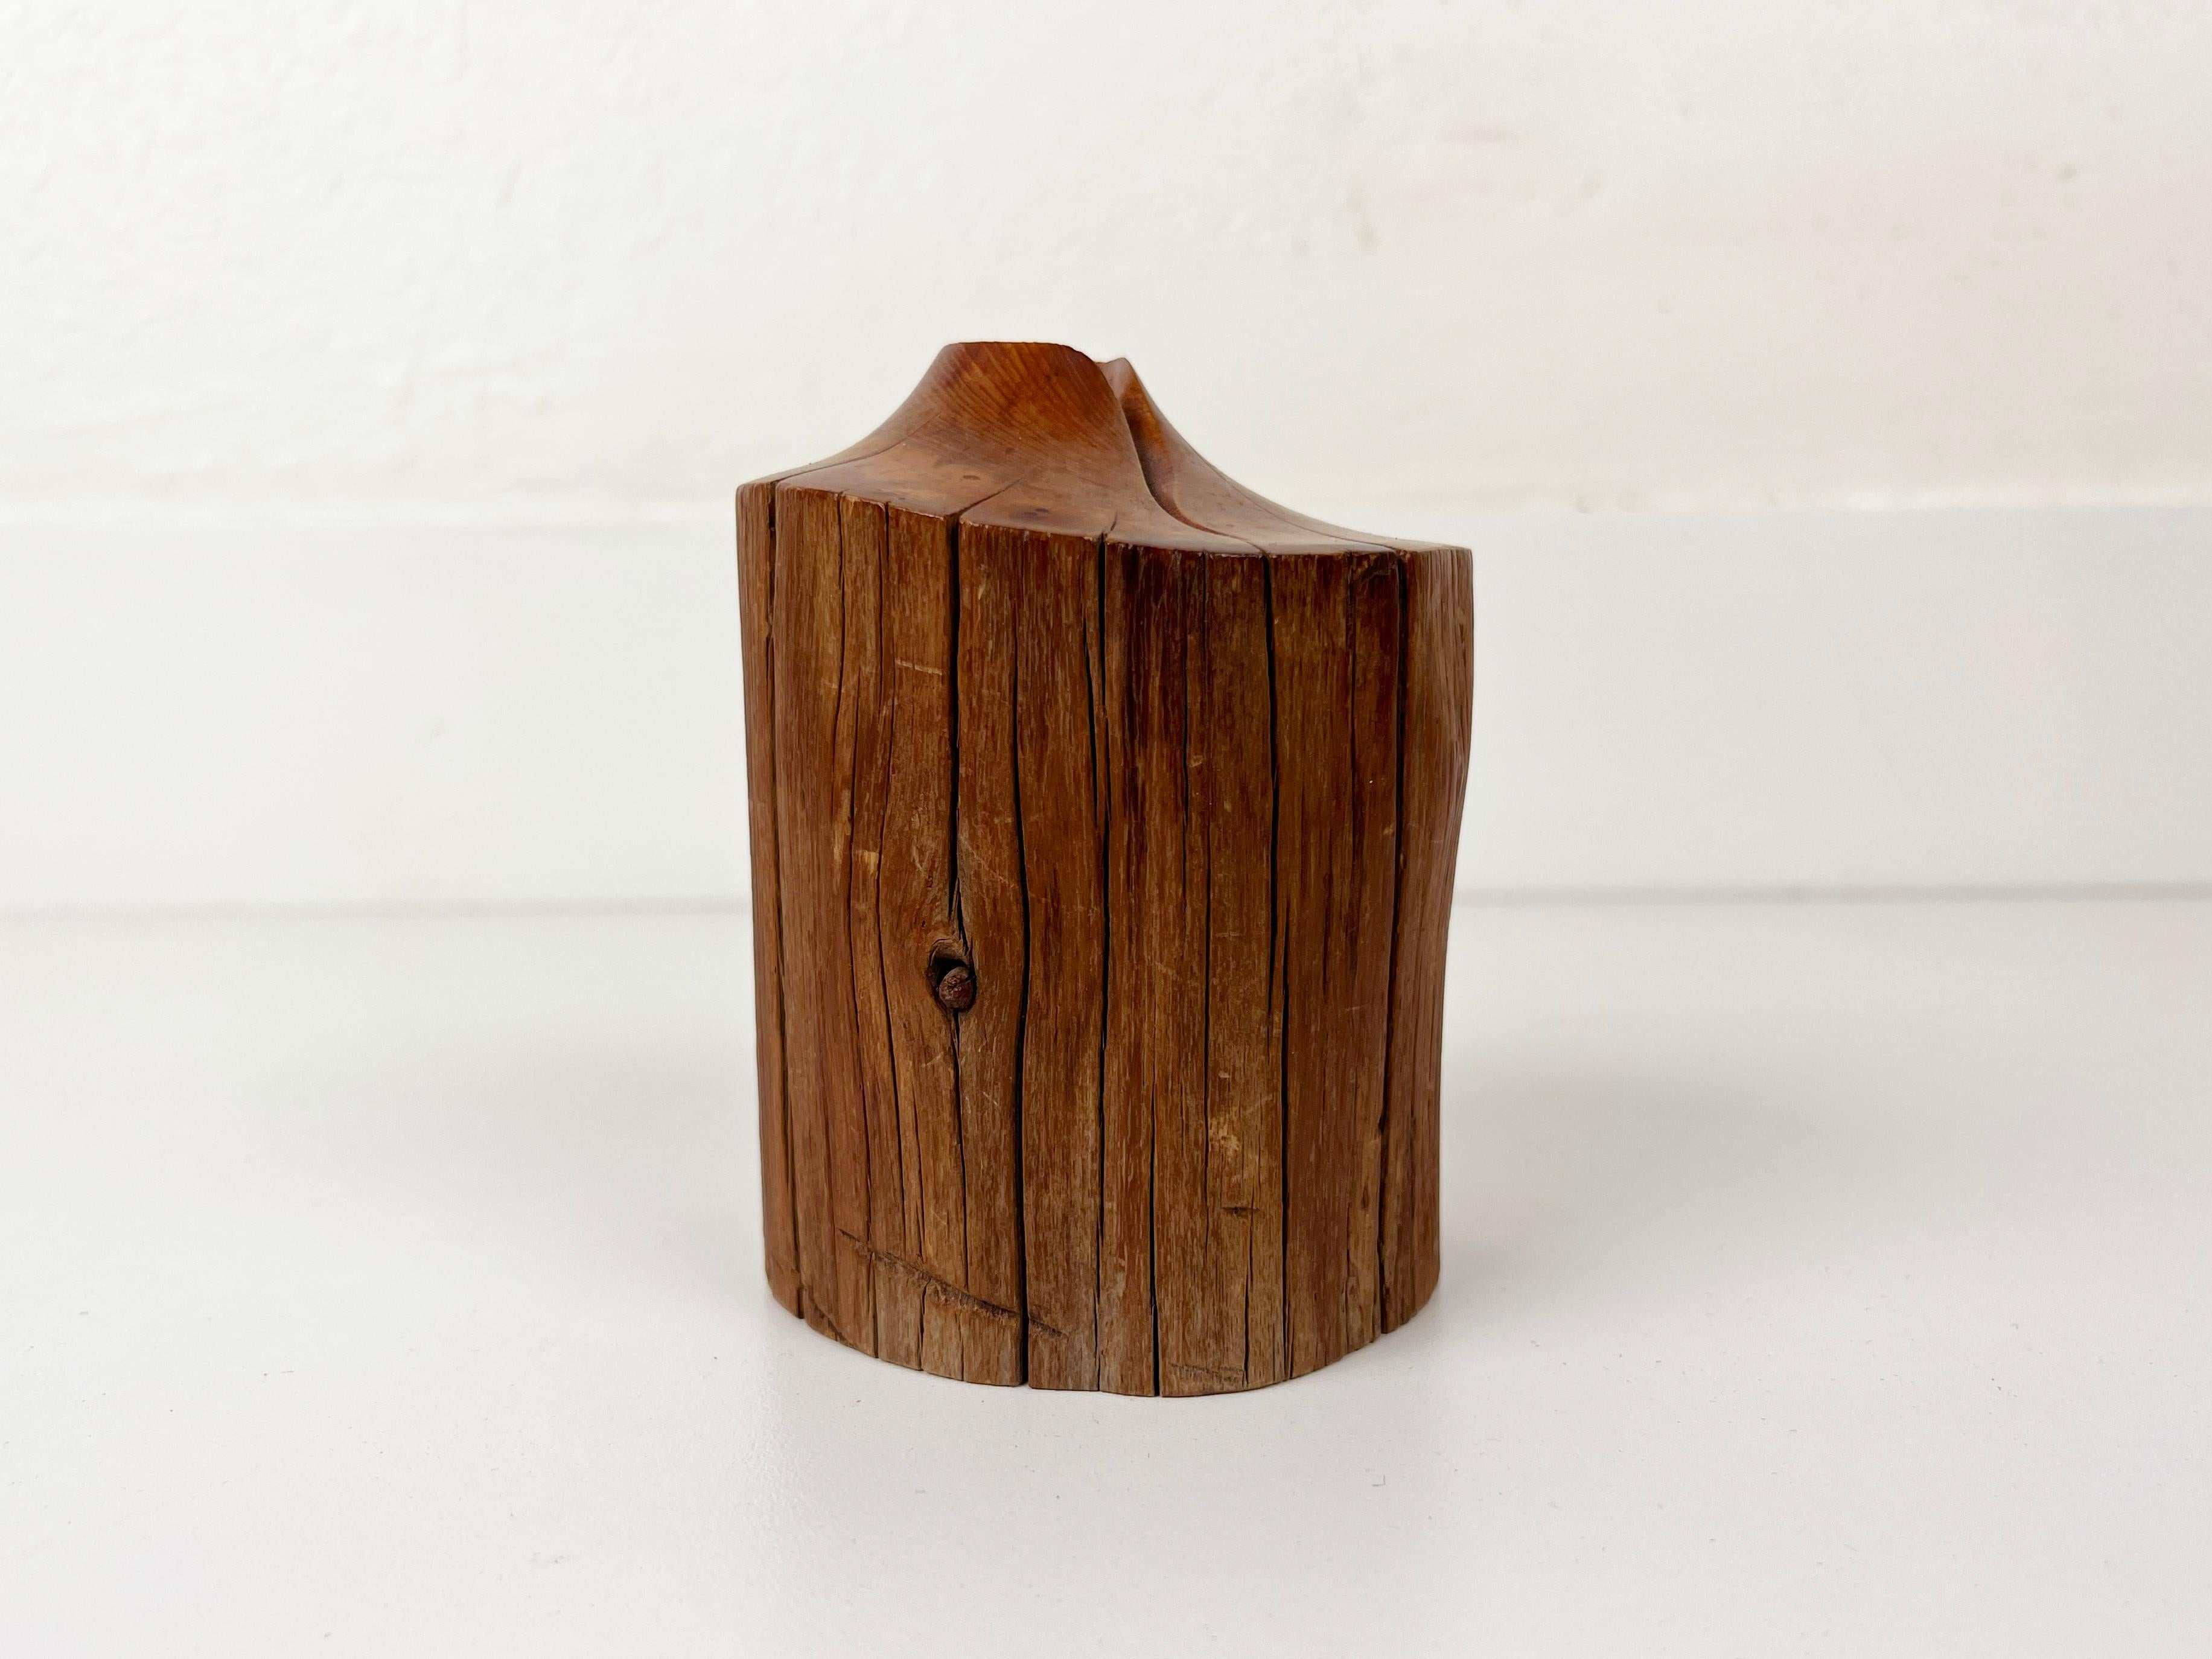 Vintage hand carved live edge budvase made from teak. 

Artist: Unknown

Year: 1960s

Style: Mid-Century Modern

Dimensions: 4.5